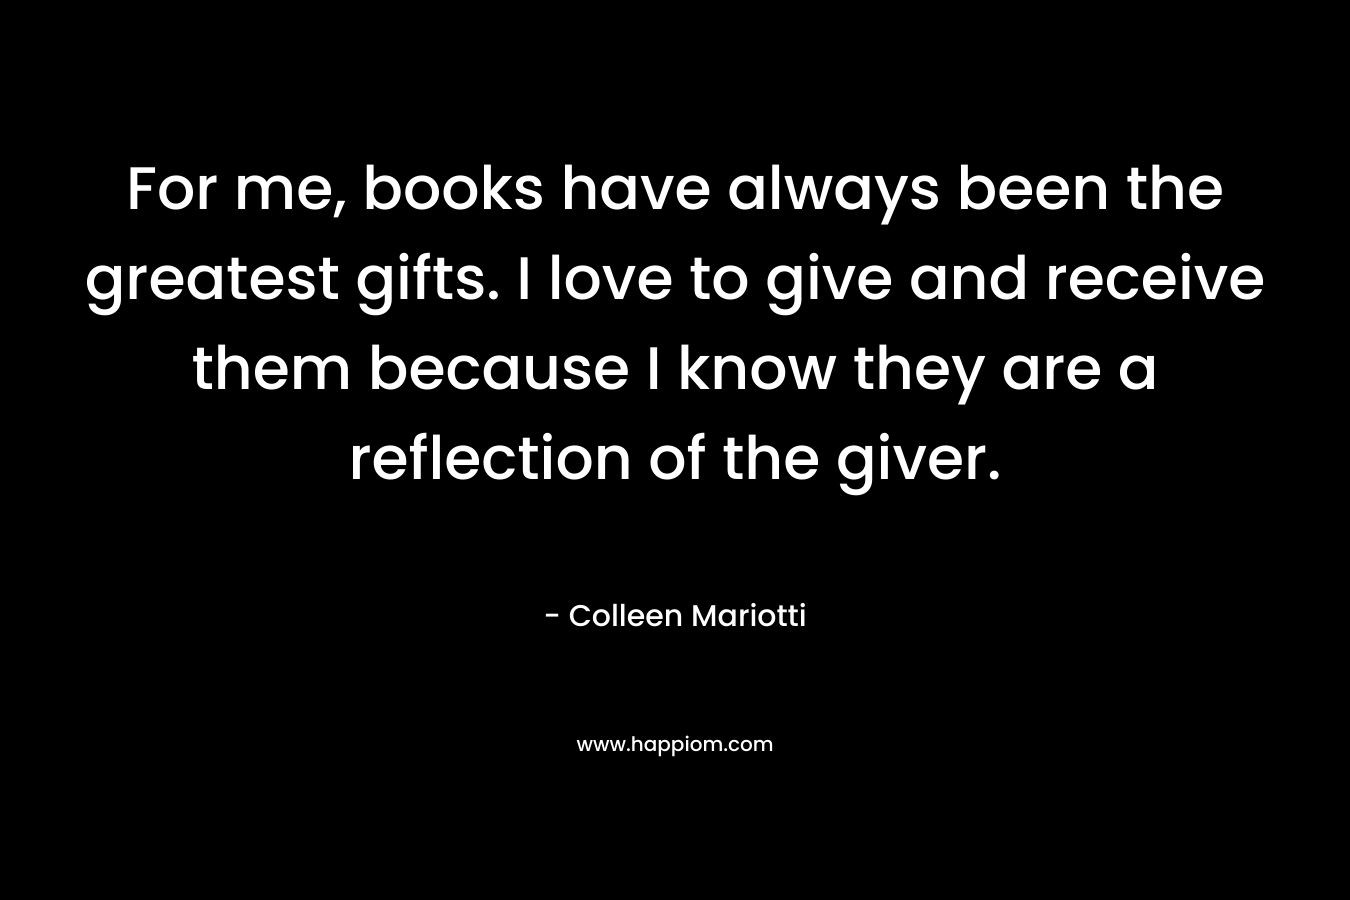 For me, books have always been the greatest gifts. I love to give and receive them because I know they are a reflection of the giver.